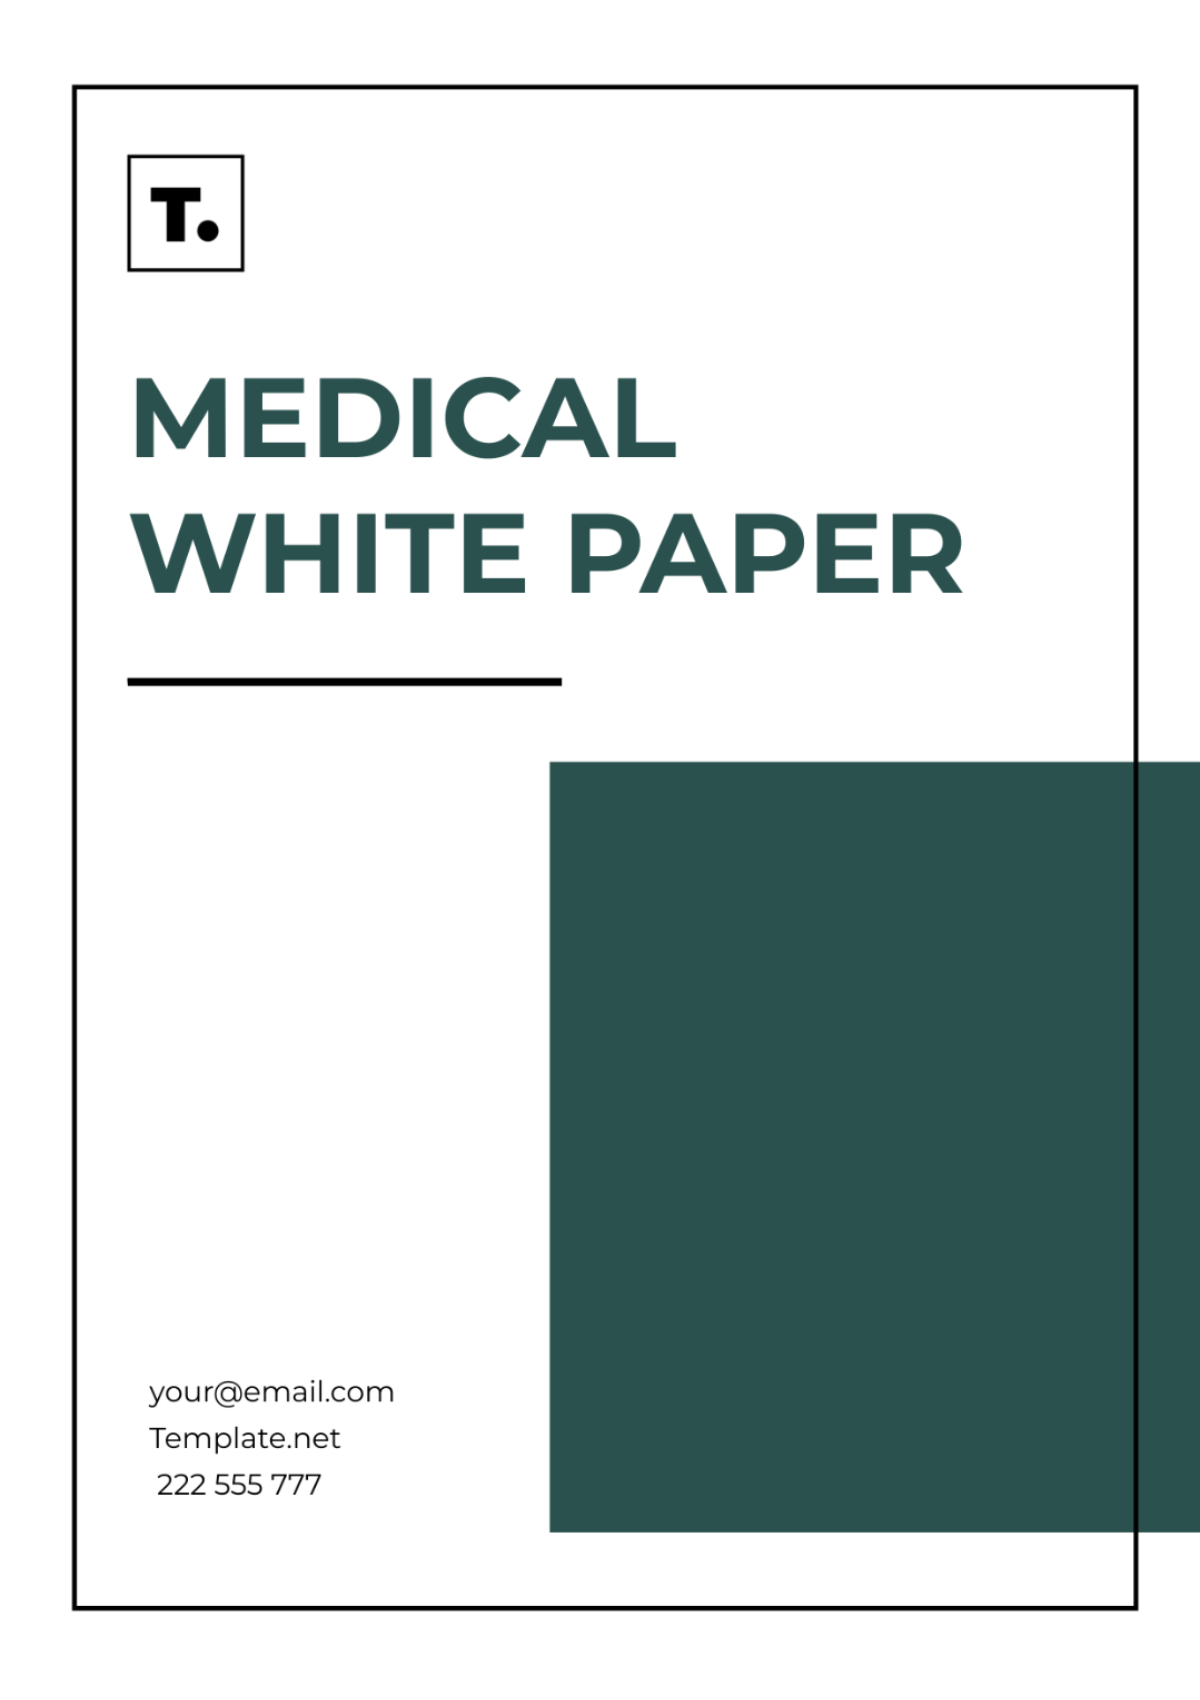 Medical White Paper Template